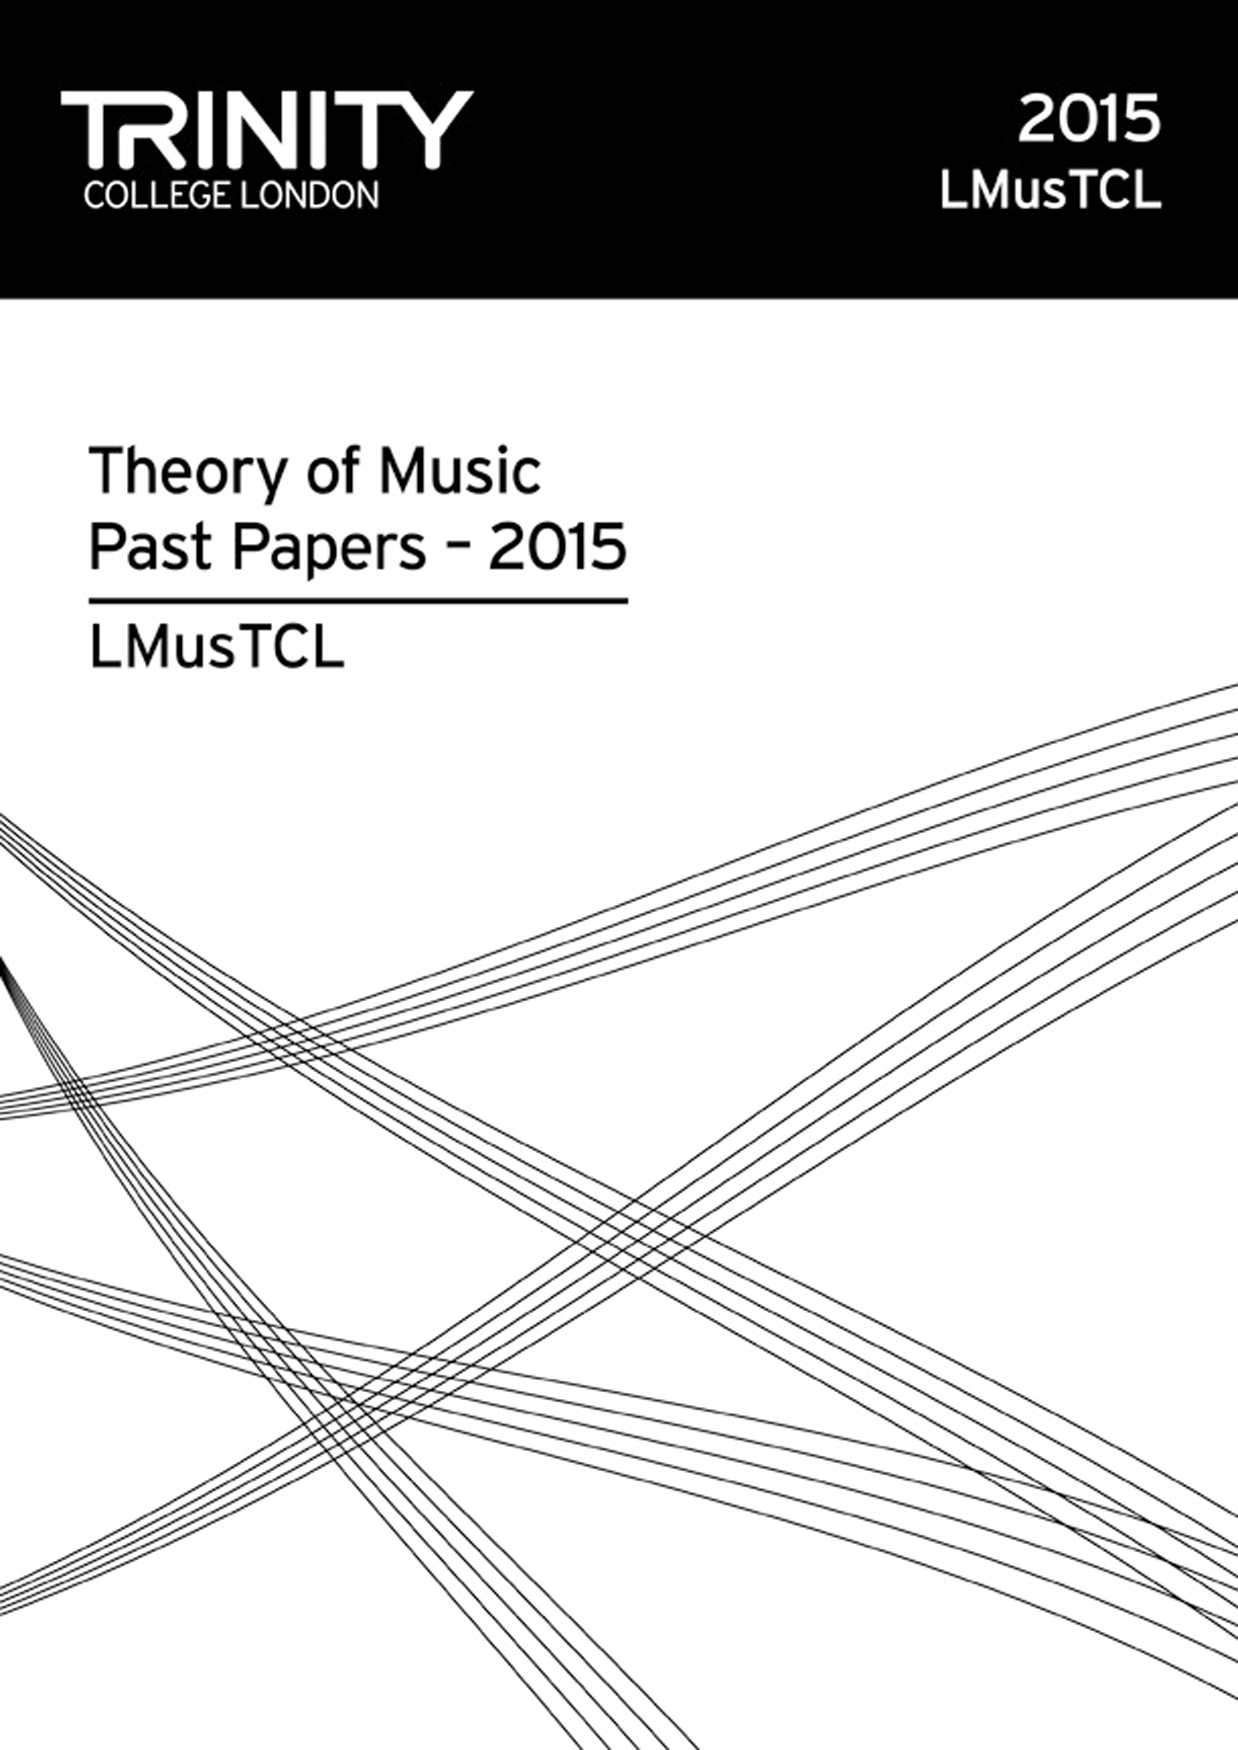 LMusTCL Past Papers: Theory